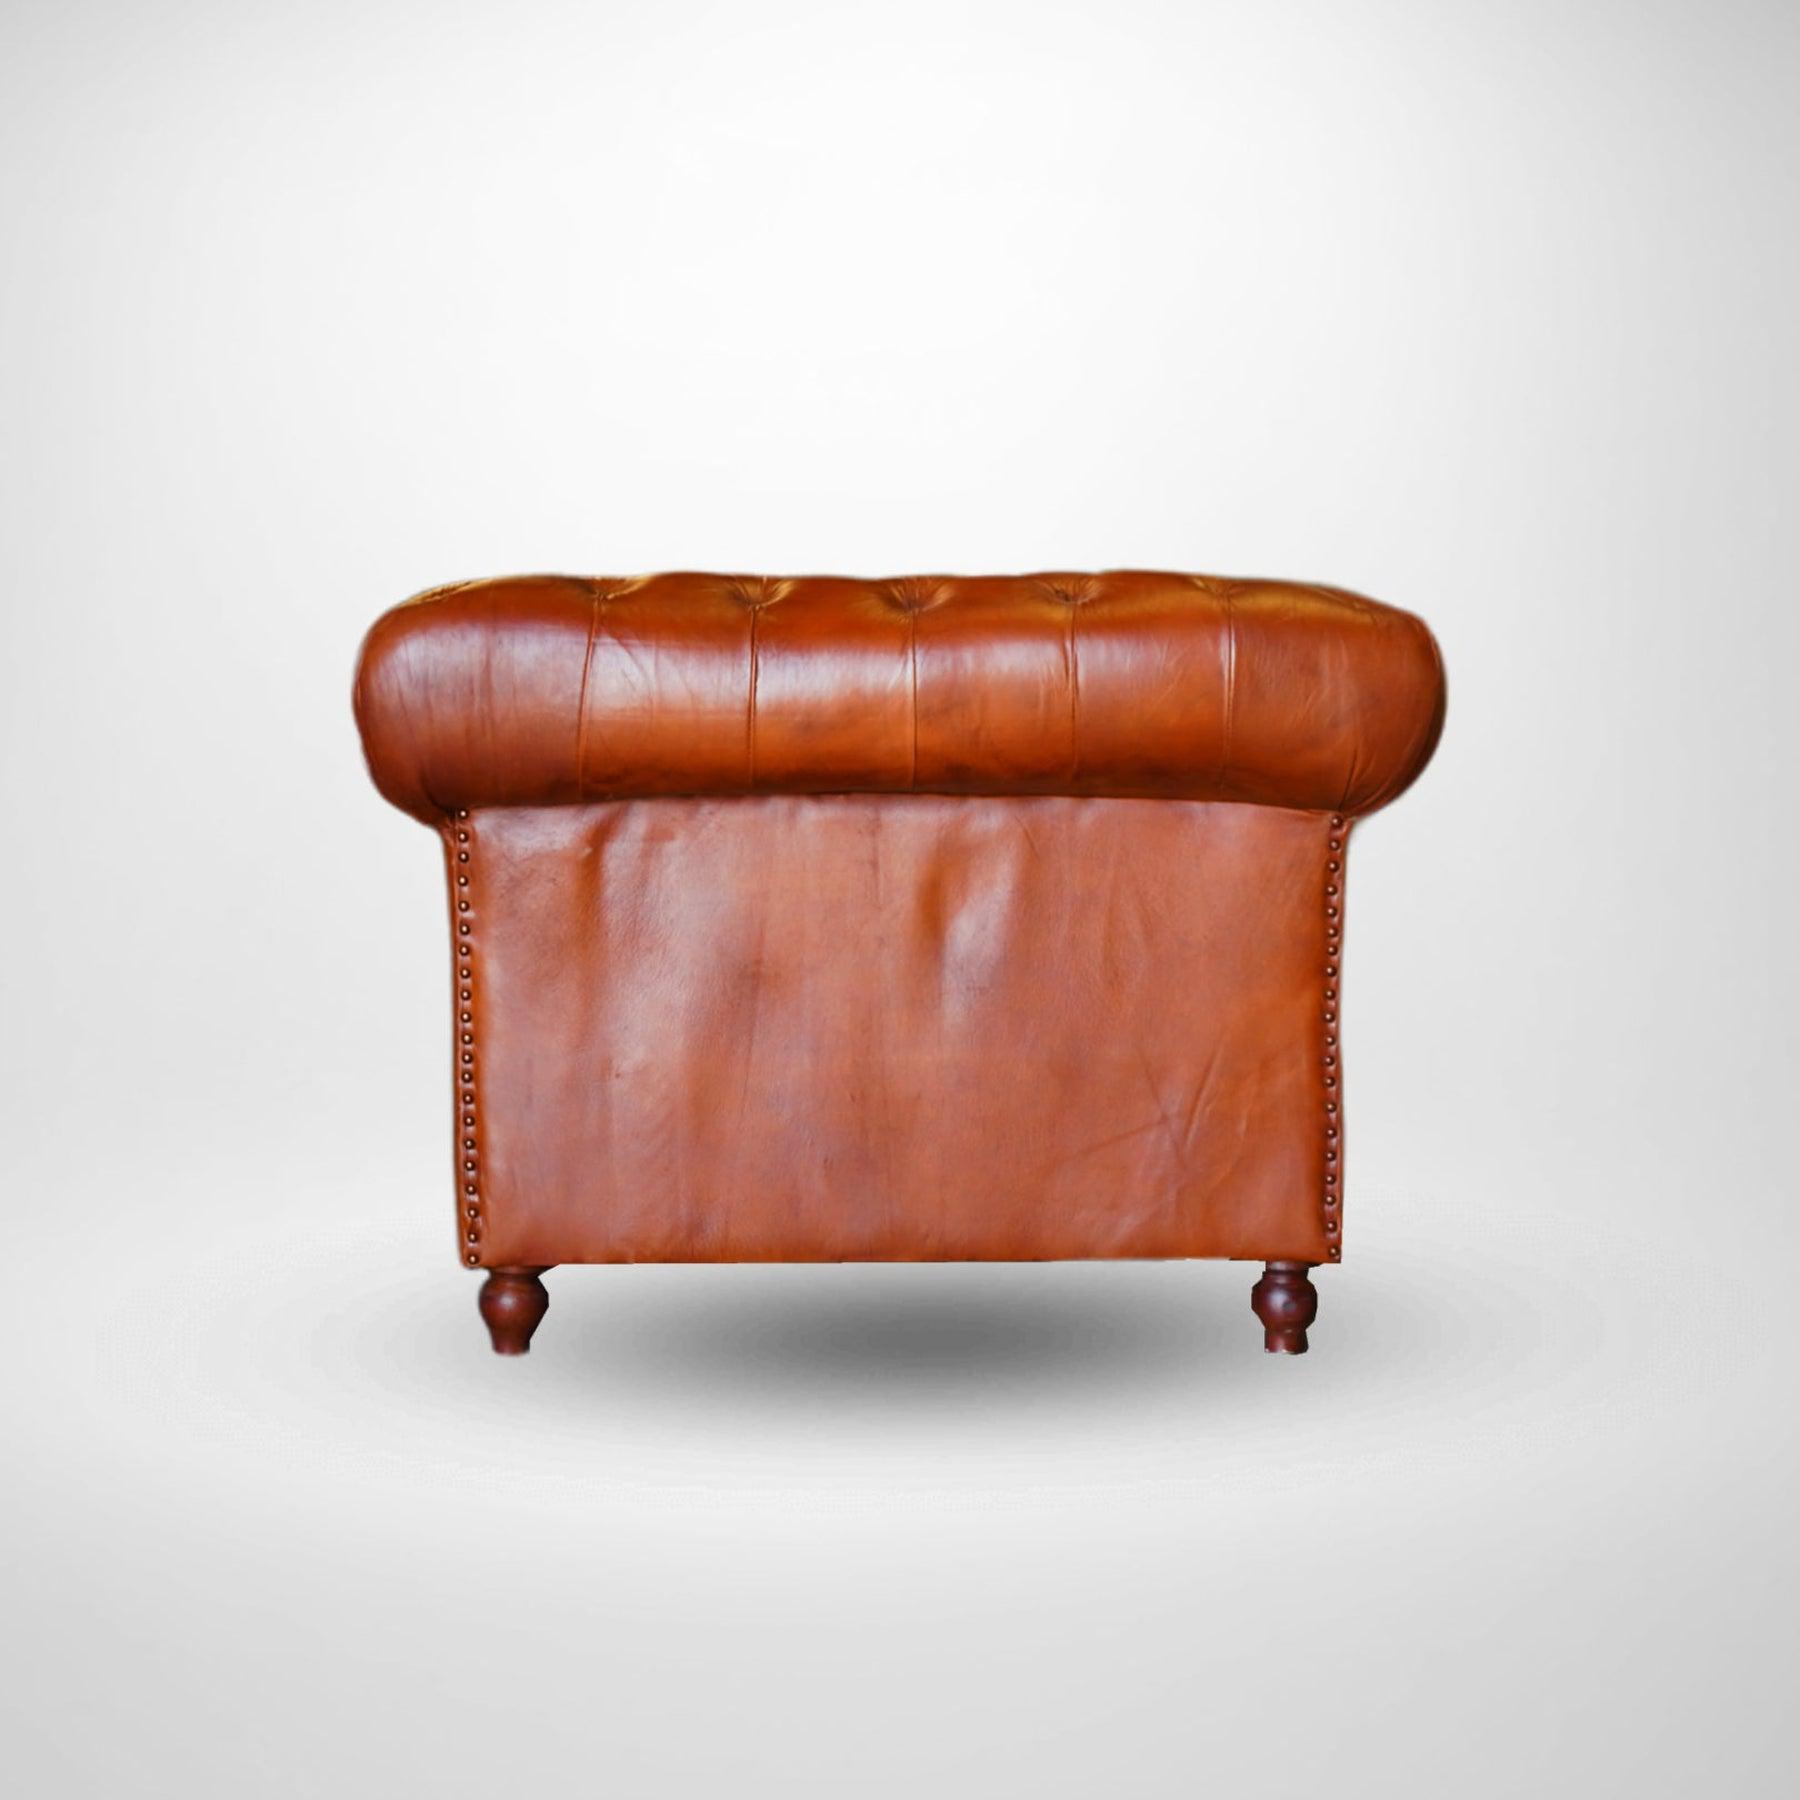 Leather Accent Chair | Chesterfield Armchair with Wooden legs | Upholstered One Seat | 35x40x30 inches